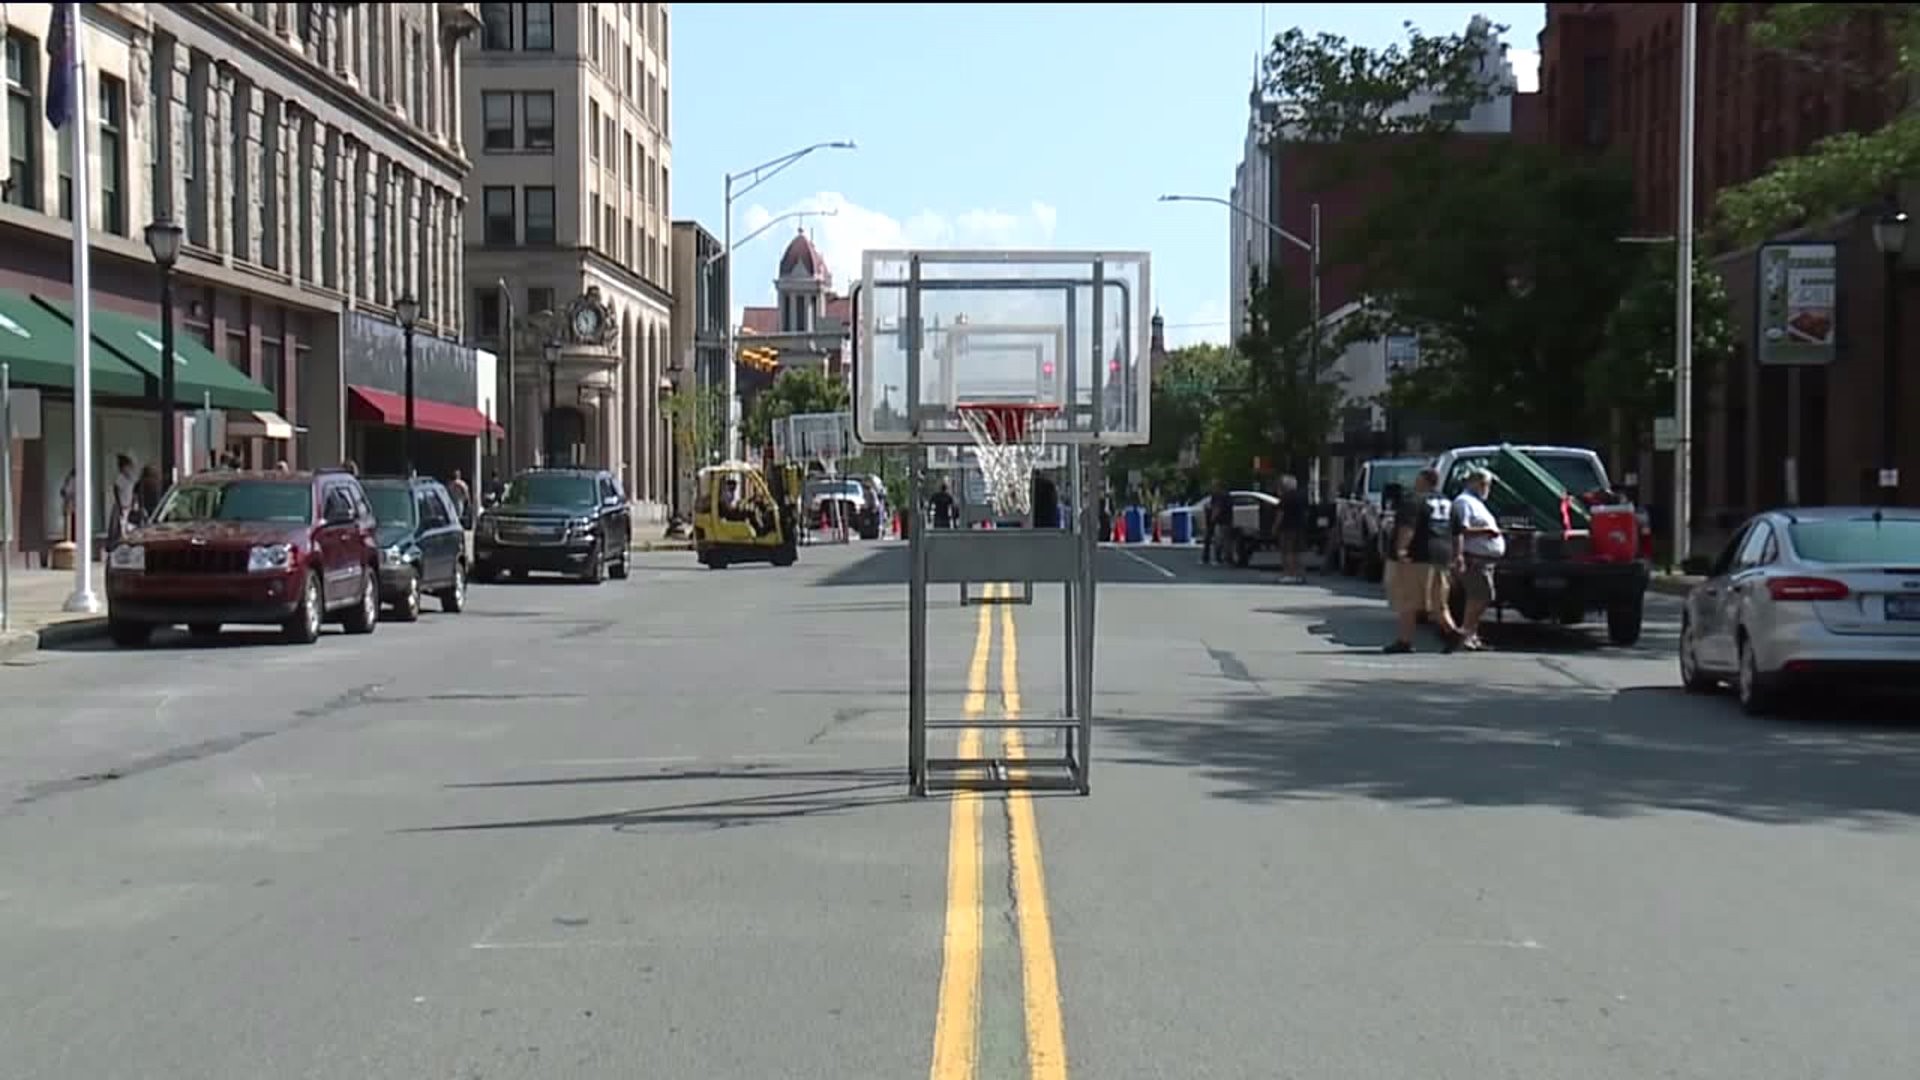 Basketball Tournament, Construction Tie Up Traffic in Downtown Scranton